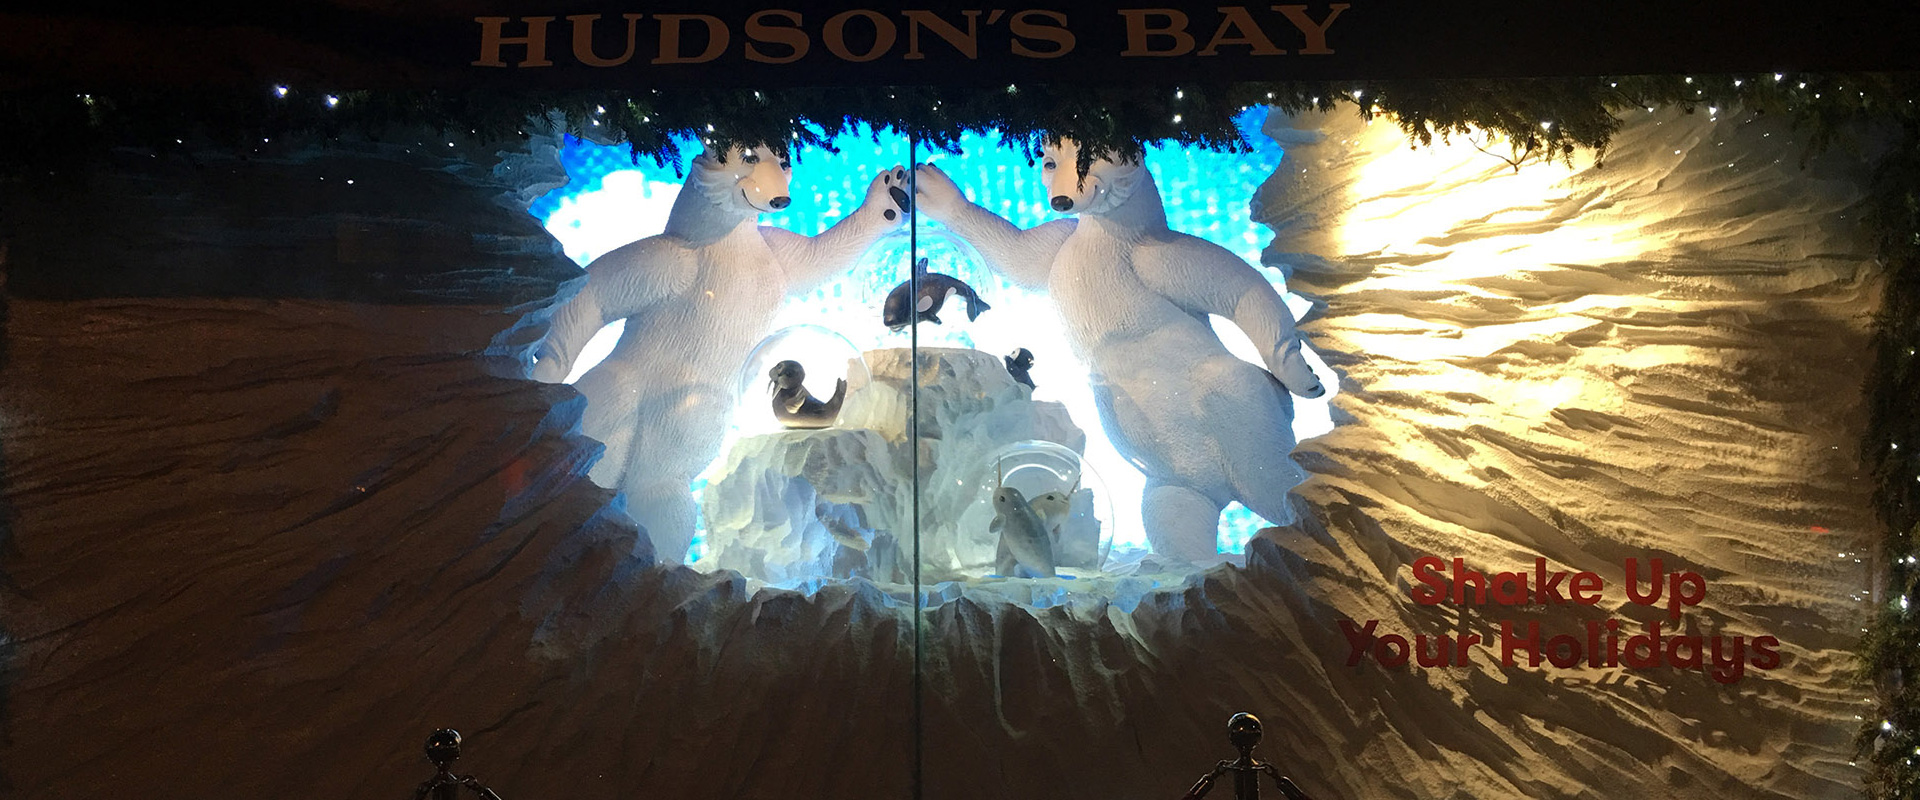 Hudson’s Bay Iconic Christmas Window Display Designs - Central Station